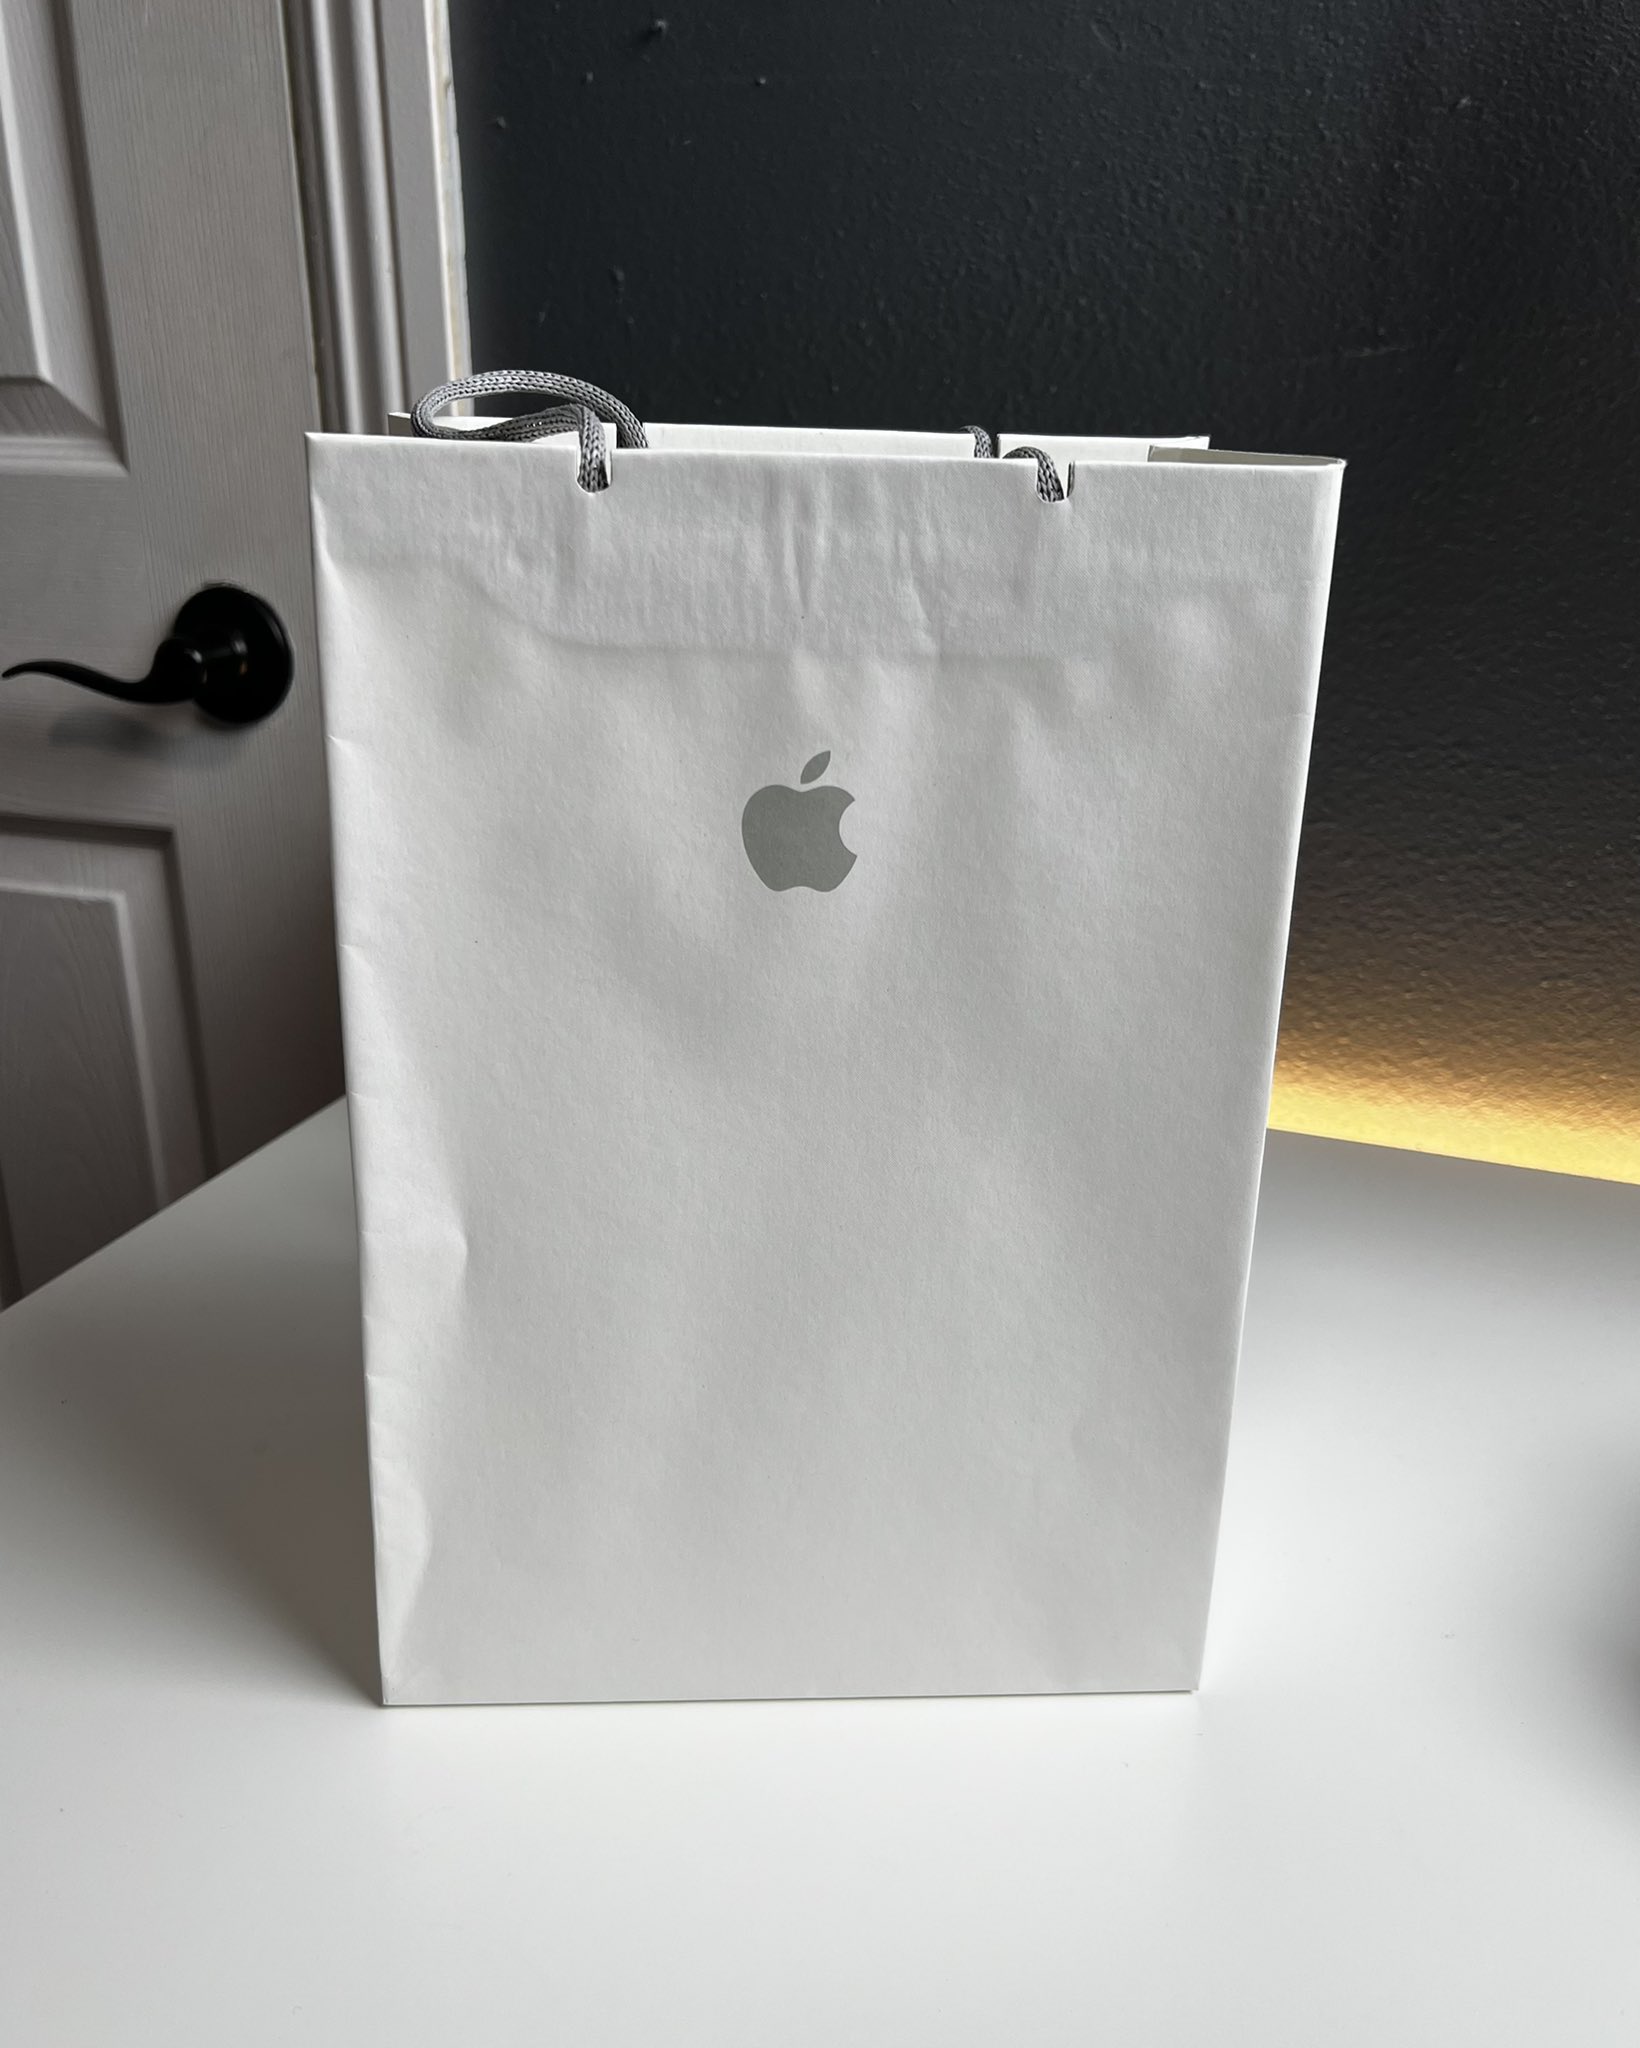 Apple Hub on X: I wonder what's in the bag 👀